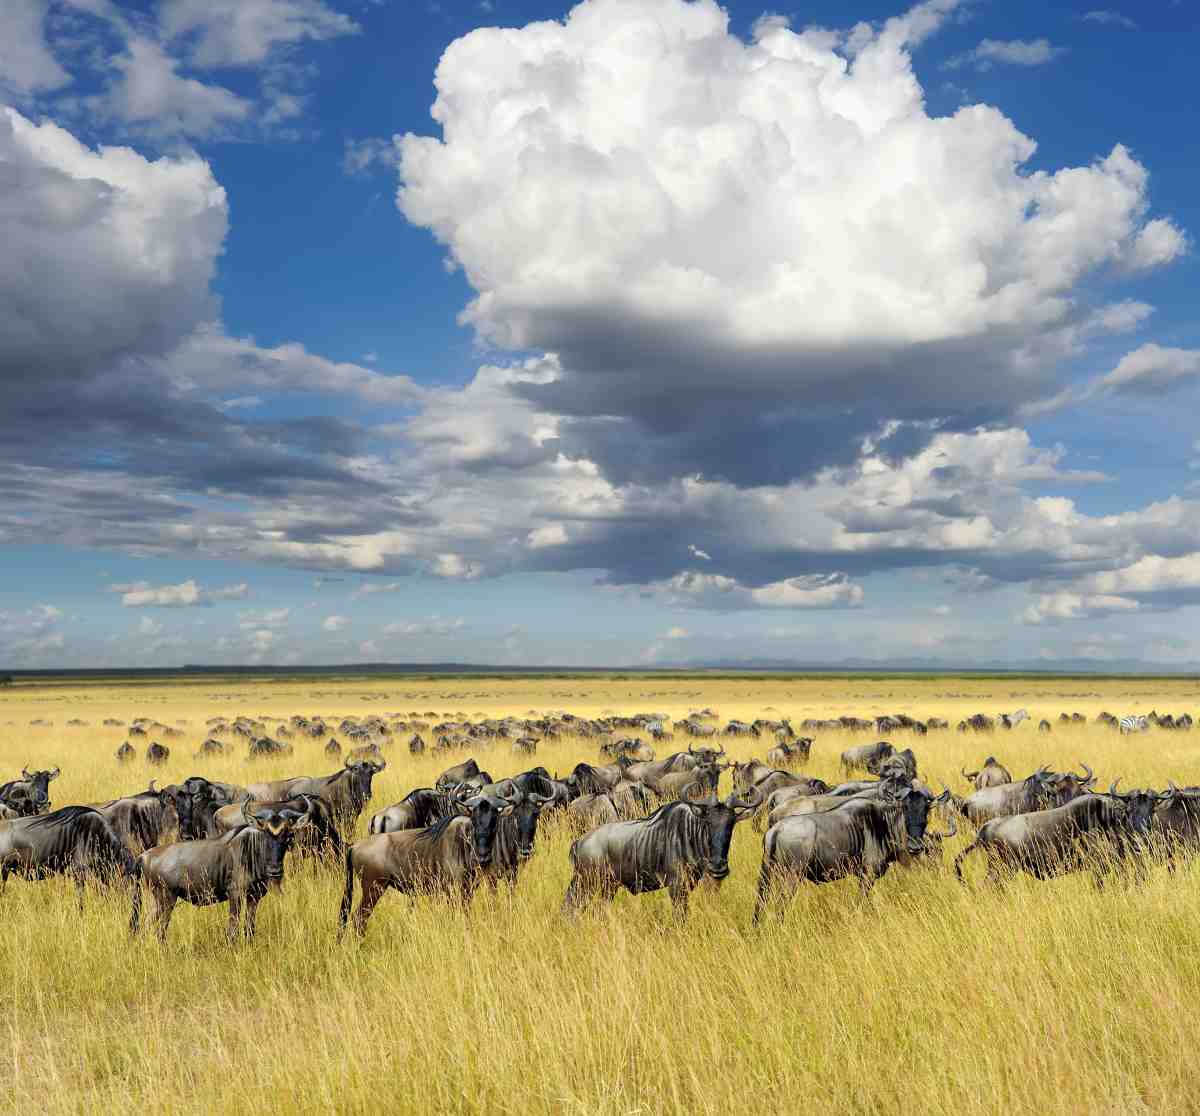 Picture of wildebeest in Tanzania on Gondwana Ecotour's Great Migration Camping Safari.